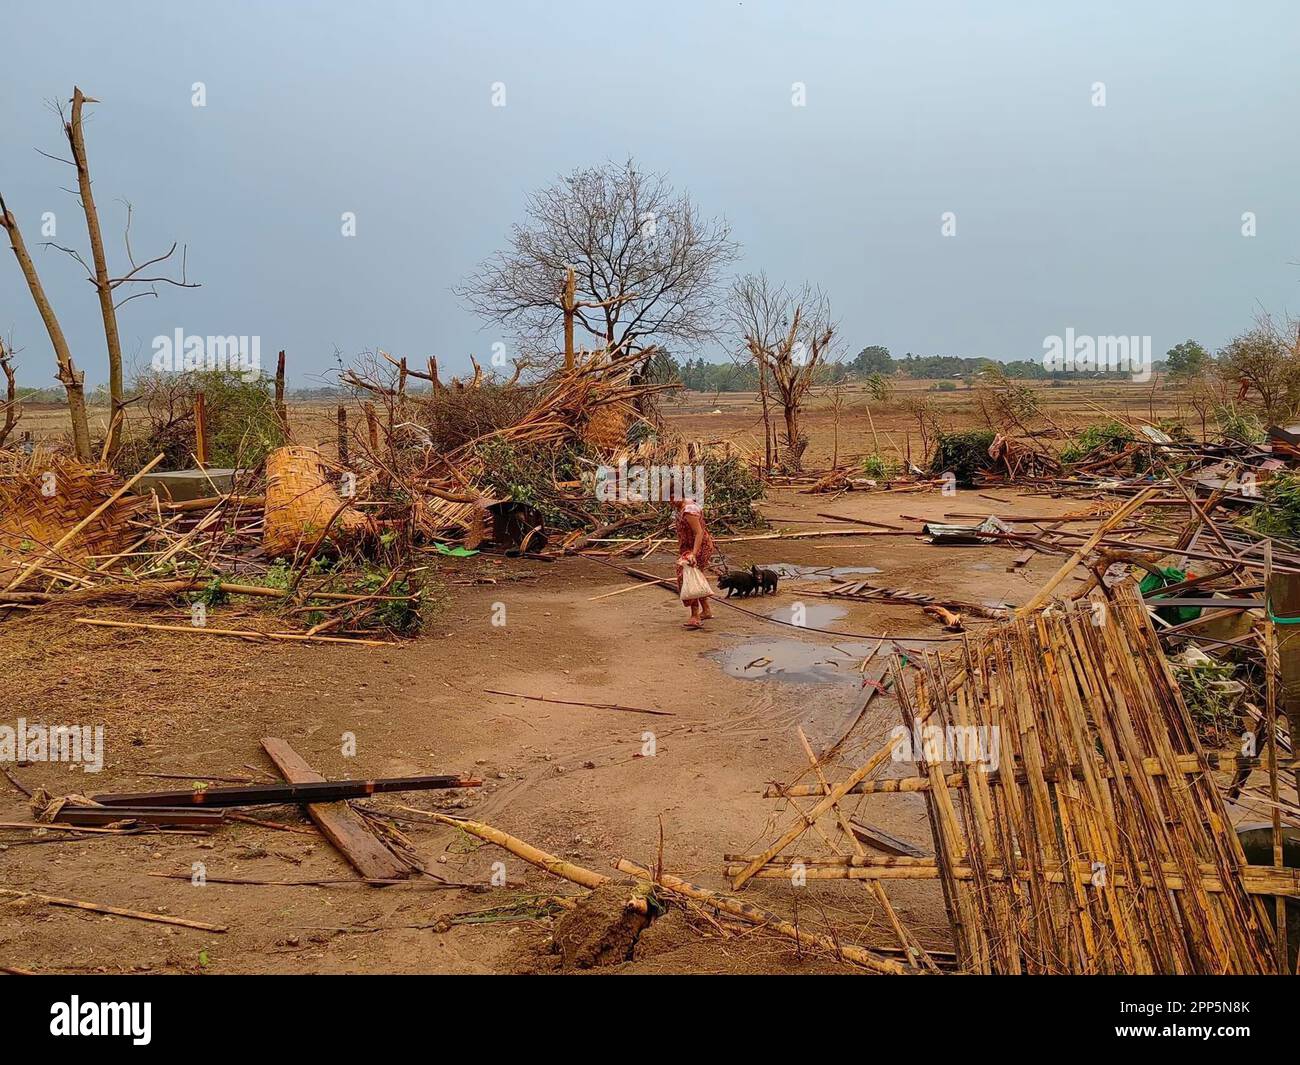 (230422) -- NAY PYI TAW, April 22, 2023 (Xinhua) -- This photo taken with mobile phone on April 21, 2023 shows a woman walking by damaged houses after a tornado hits Lewe township of Nay Pyi Taw Union Territory, Myanmar. Six people were killed and 109 others injured after a deadly tornado hit central Myanmar on Friday, local authorities said. (Str/Xinhua) Stock Photo